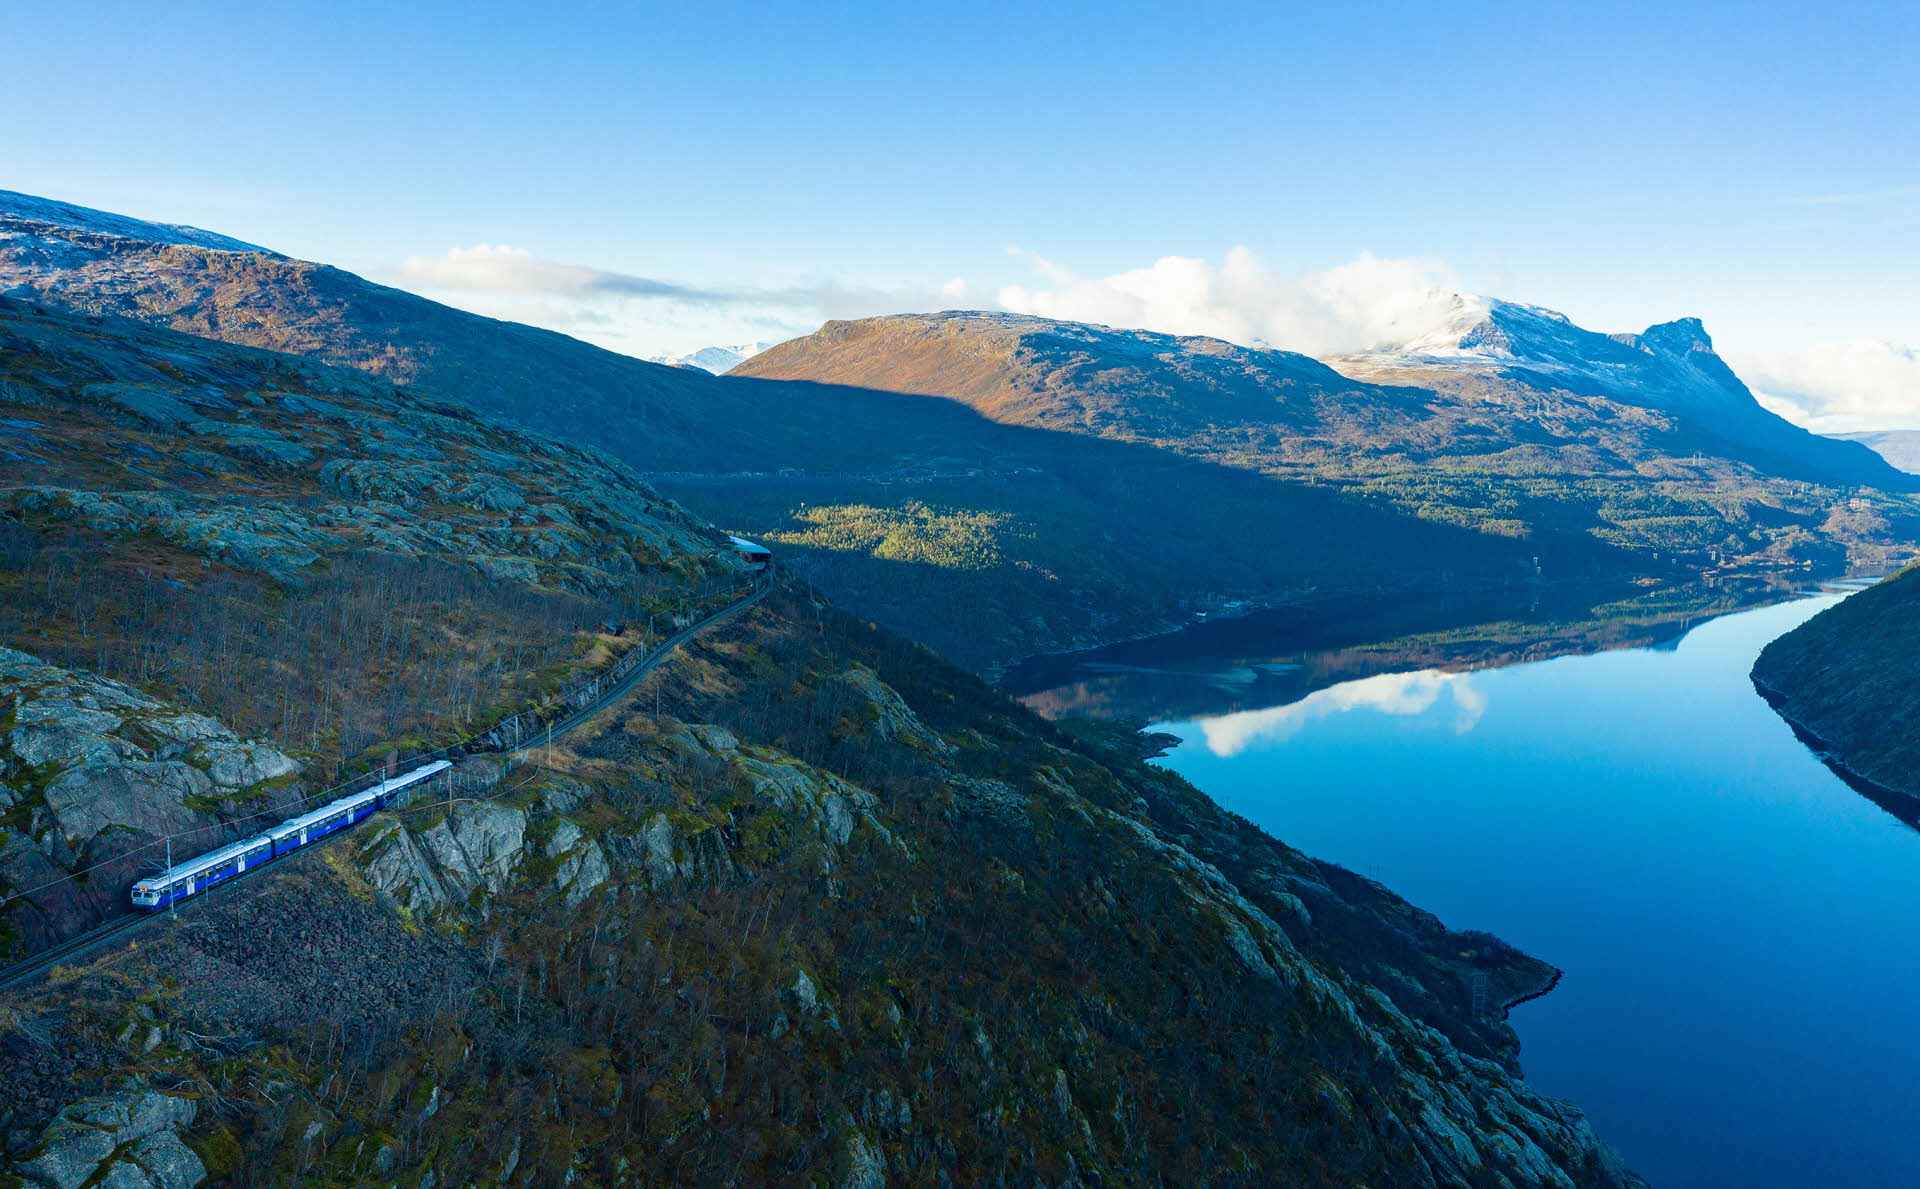 The blue 3 coach Acrtic Train snails up the mountain in autumn by the still Rombakfjorden far below in Narvik Norway